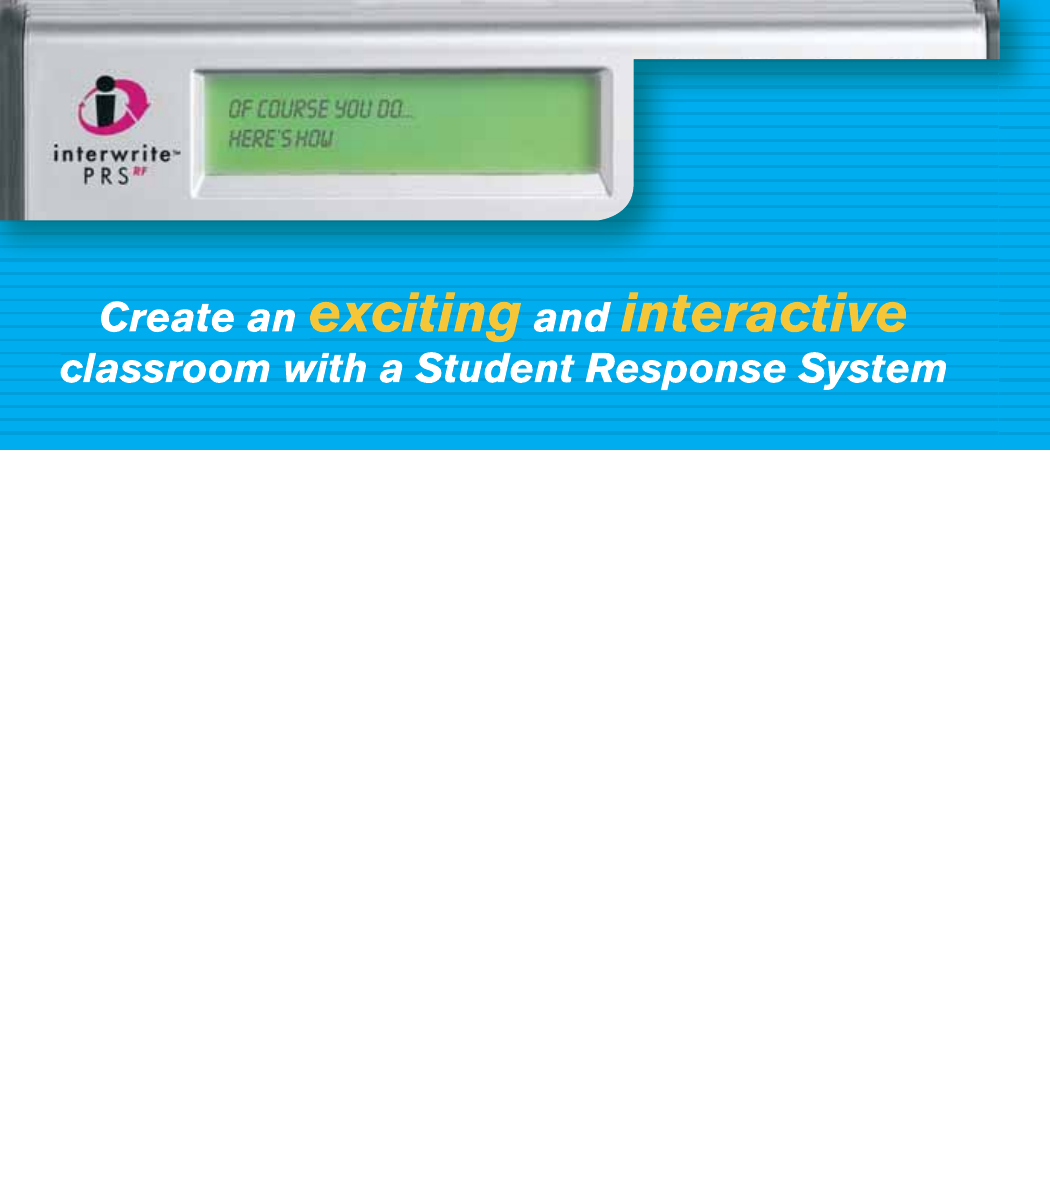 Create an exciting and interactiveclassroom with a Student Response System